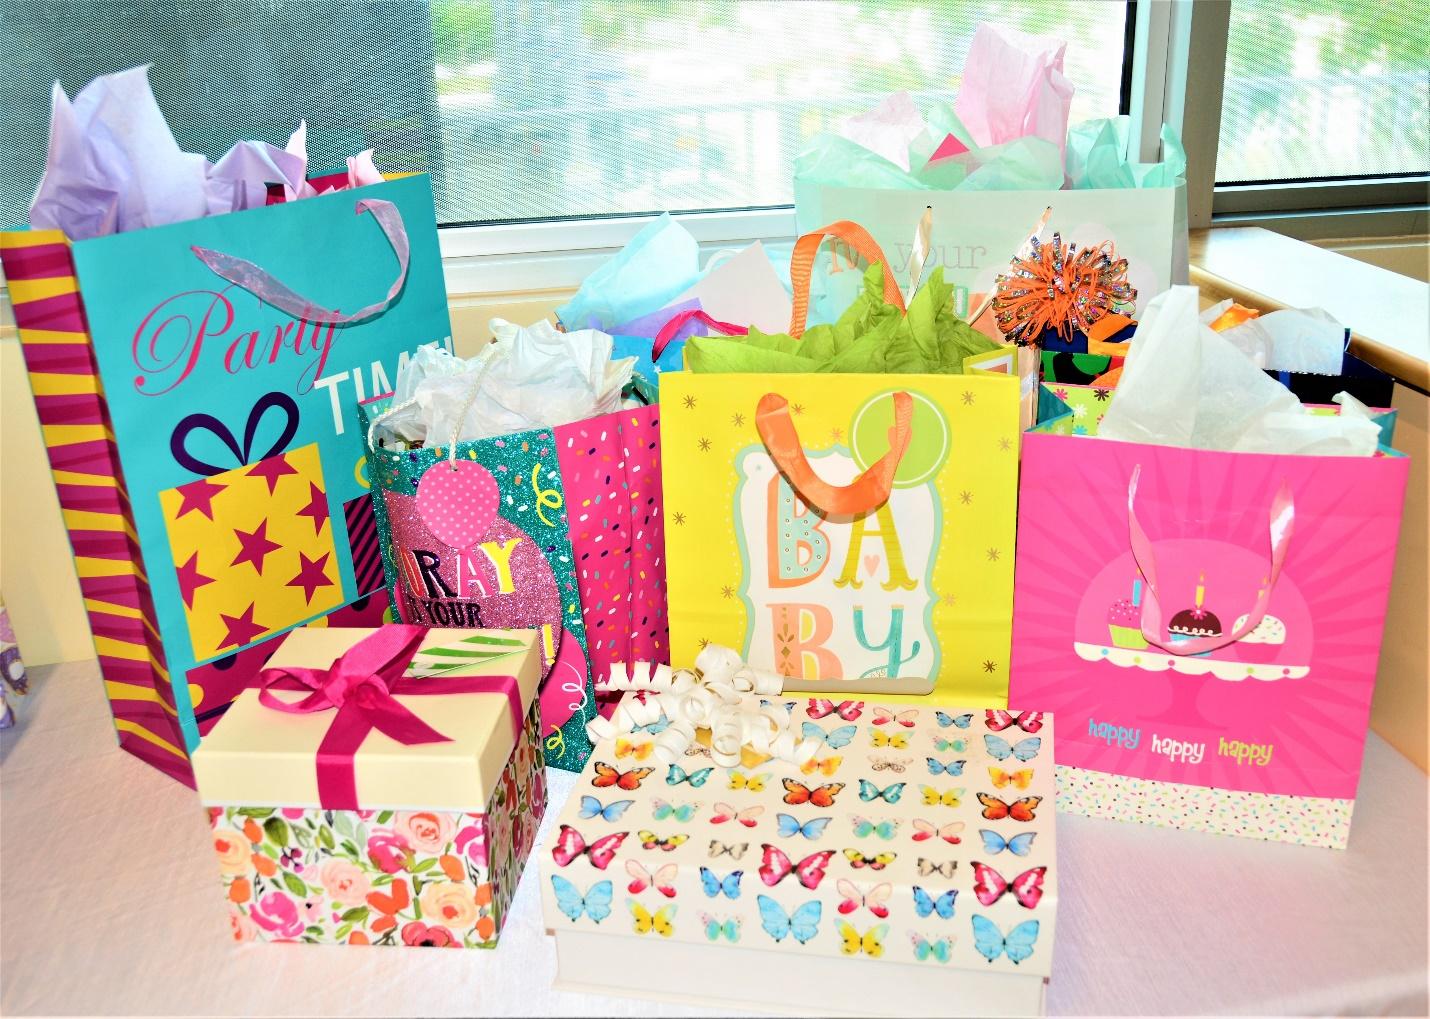 Assorted birthday bags and gifts on the table